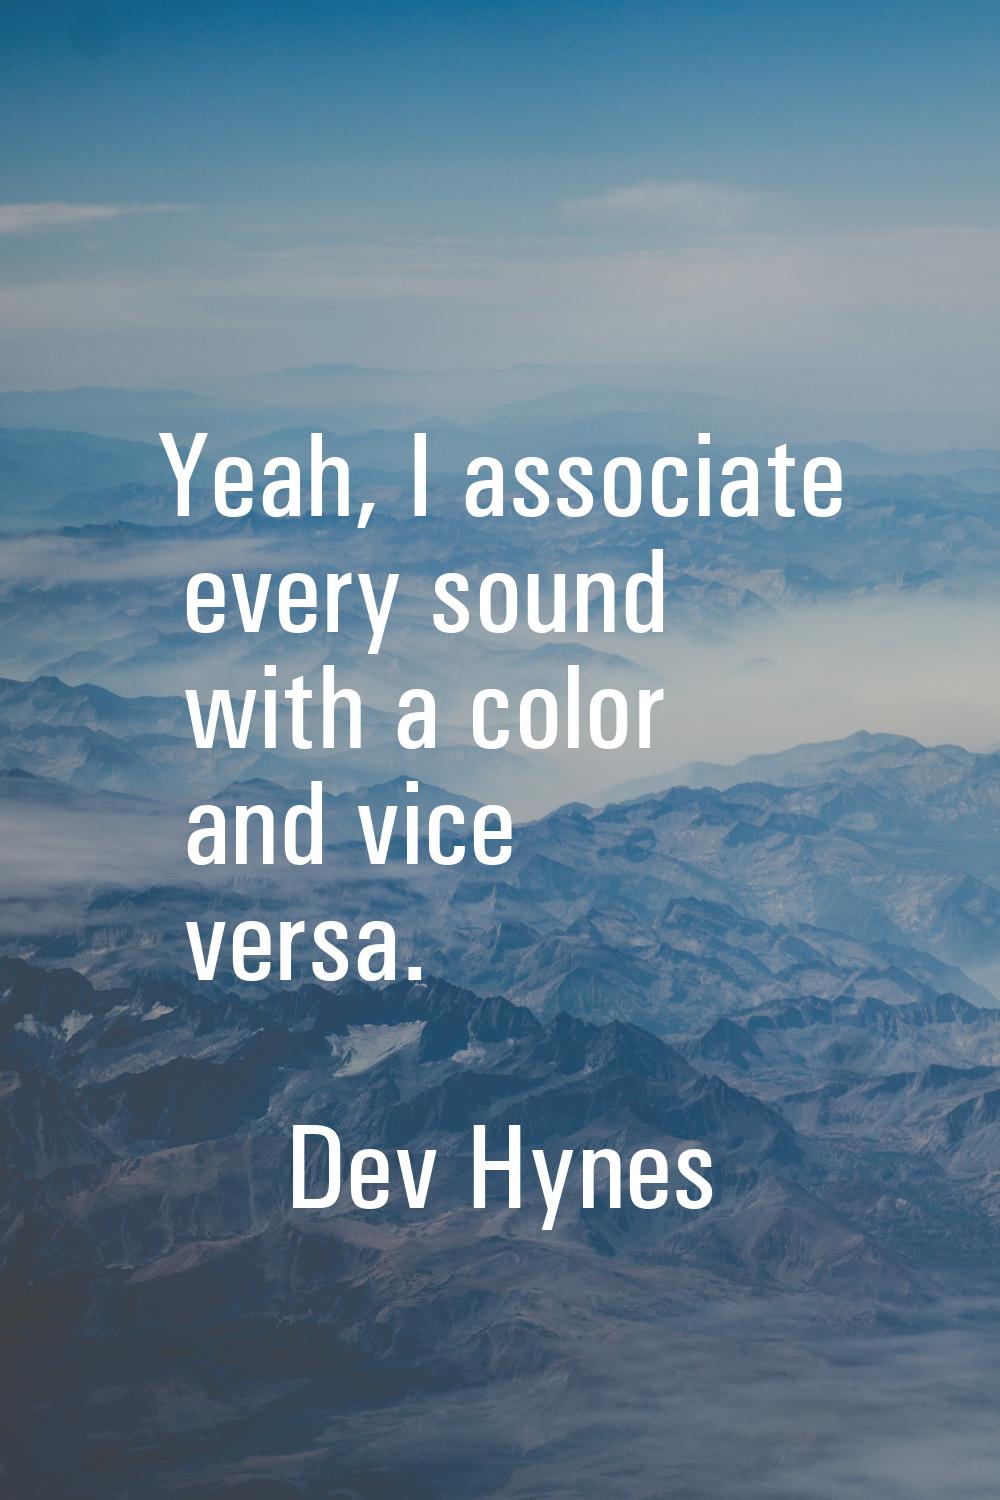 Yeah, I associate every sound with a color and vice versa.